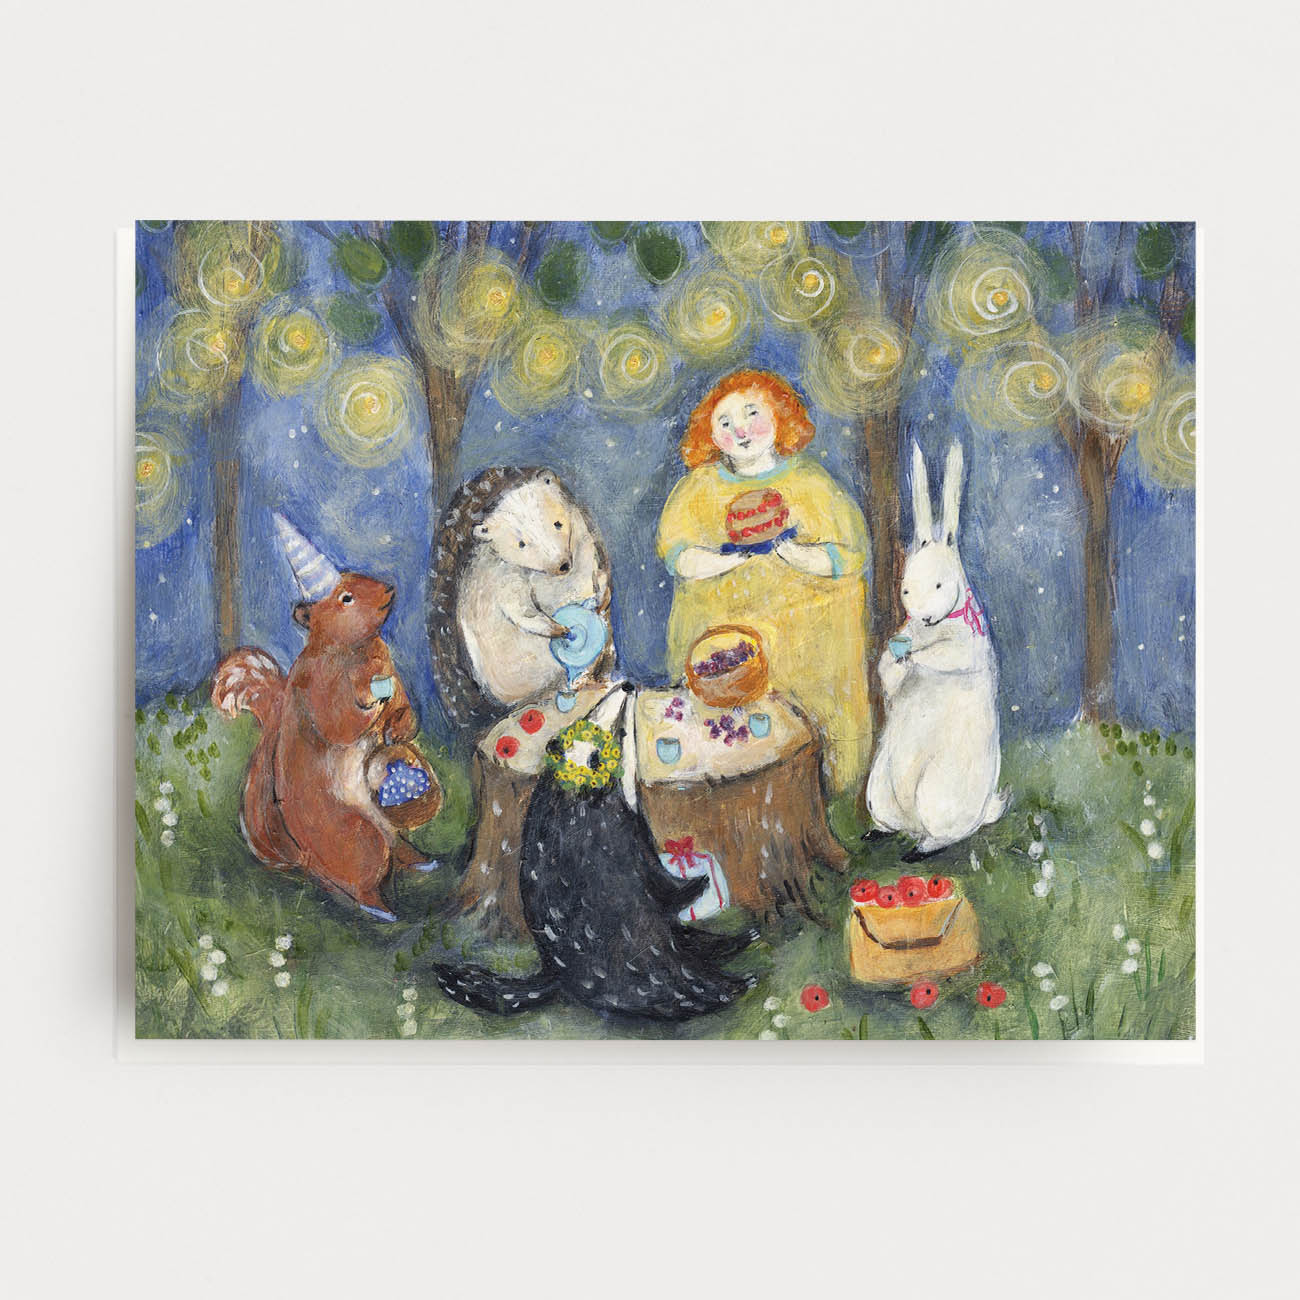 Greeting card of a girl and her animal friends having a birthday tea party on a stump, surrounded by a blue starry sky and lights hanging in the trees.  Hand illustrated by artist Katherine Lewis. Made by Ingrid Press card and gift company, ethically printed in the USA.